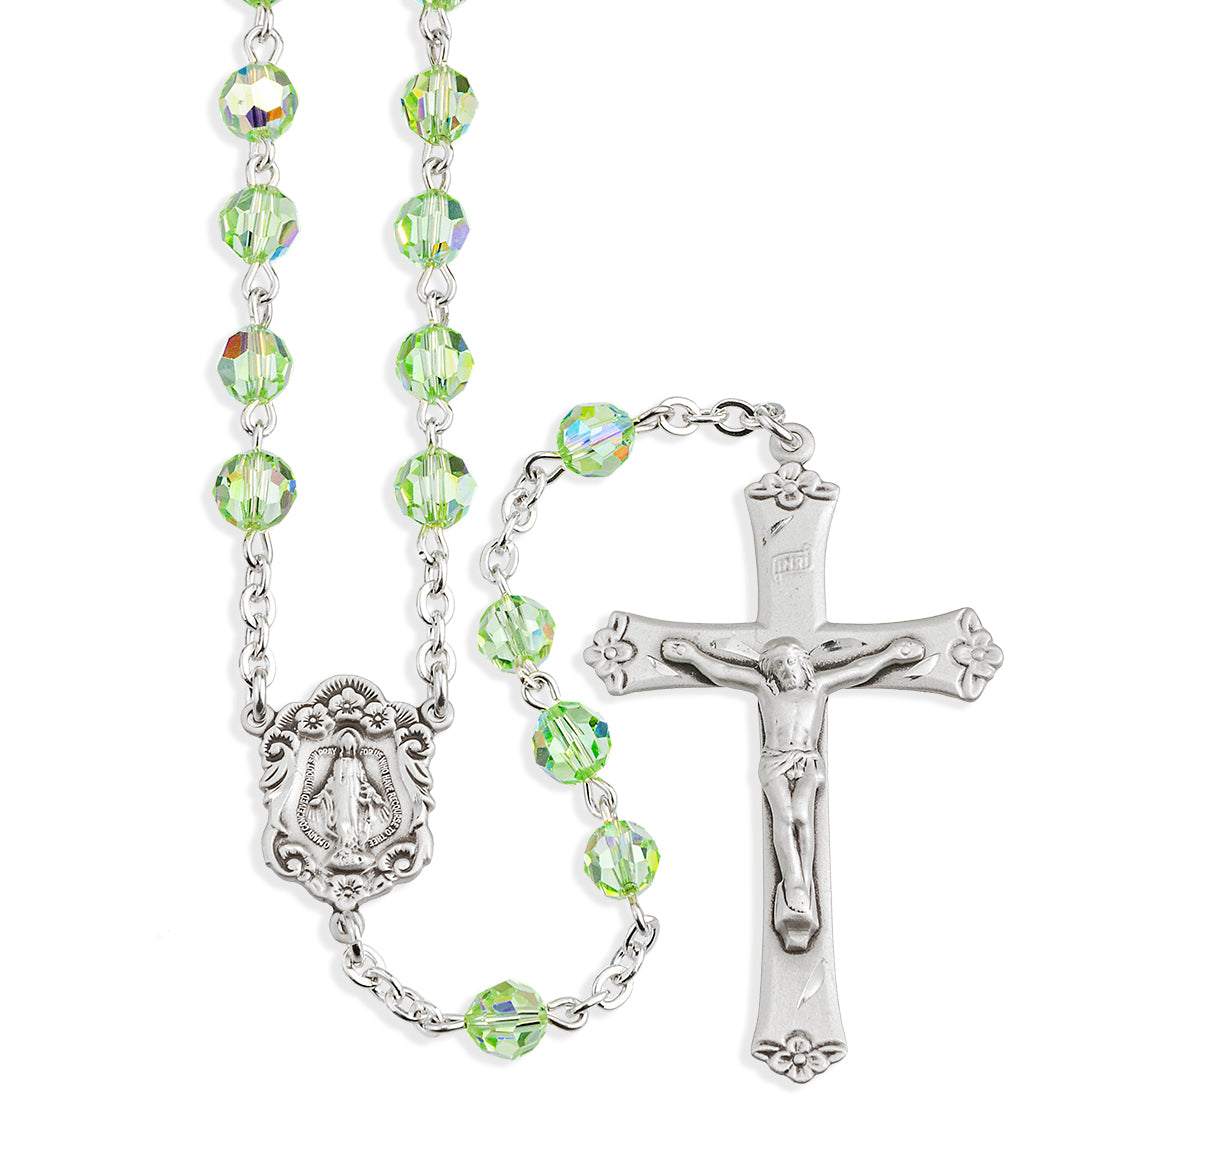 Sterling Silver Rosary Hand Made with Swarovski Crystal 6mm Chrysolite Faceted Round Beads by HMH